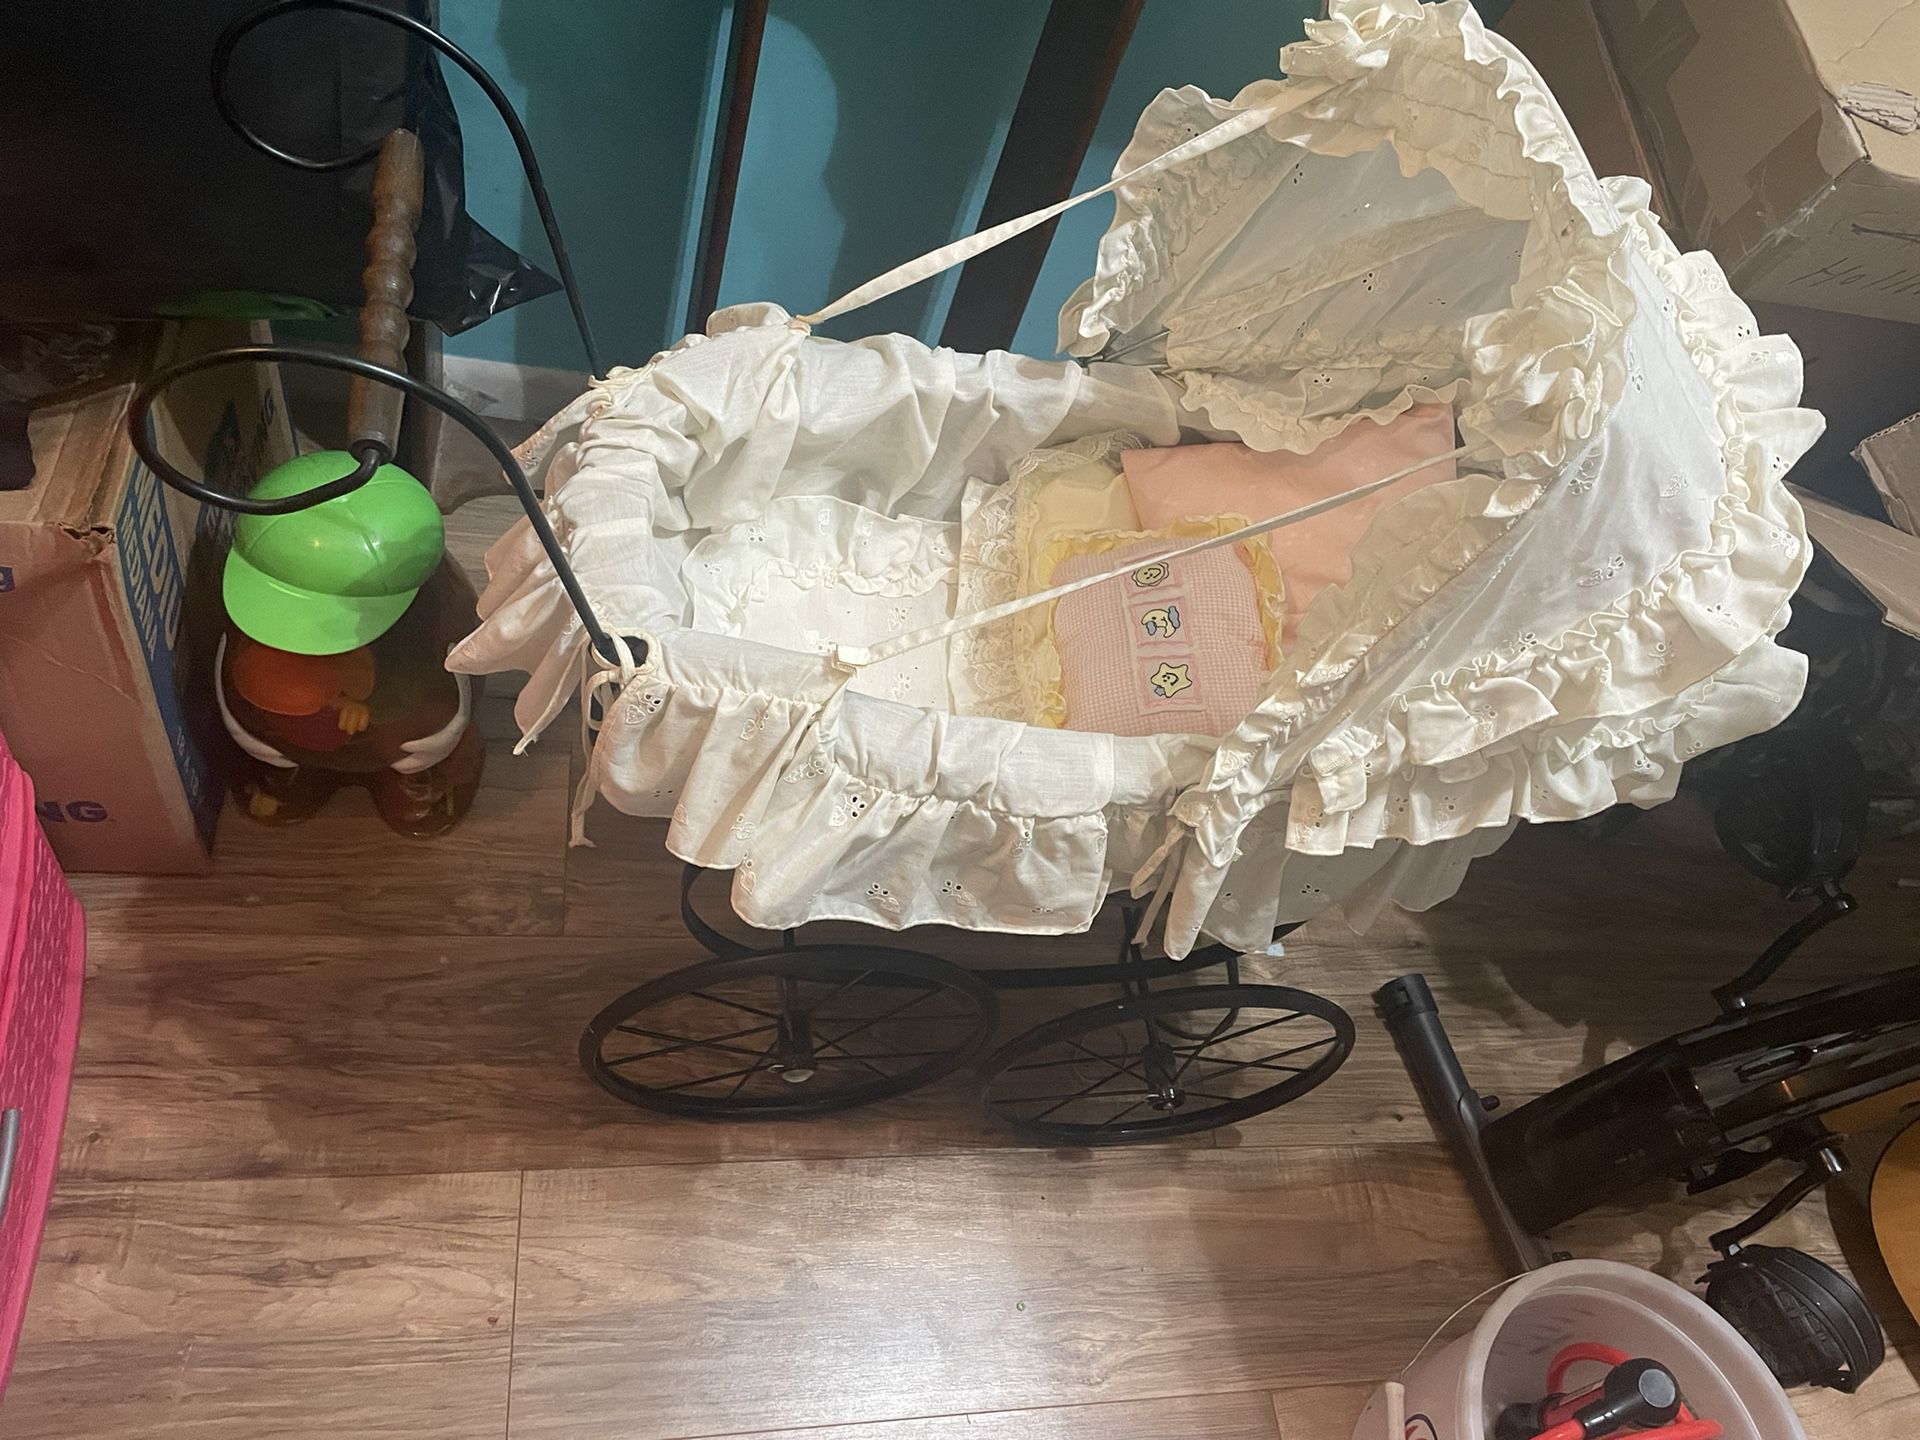 Antique baby carriage